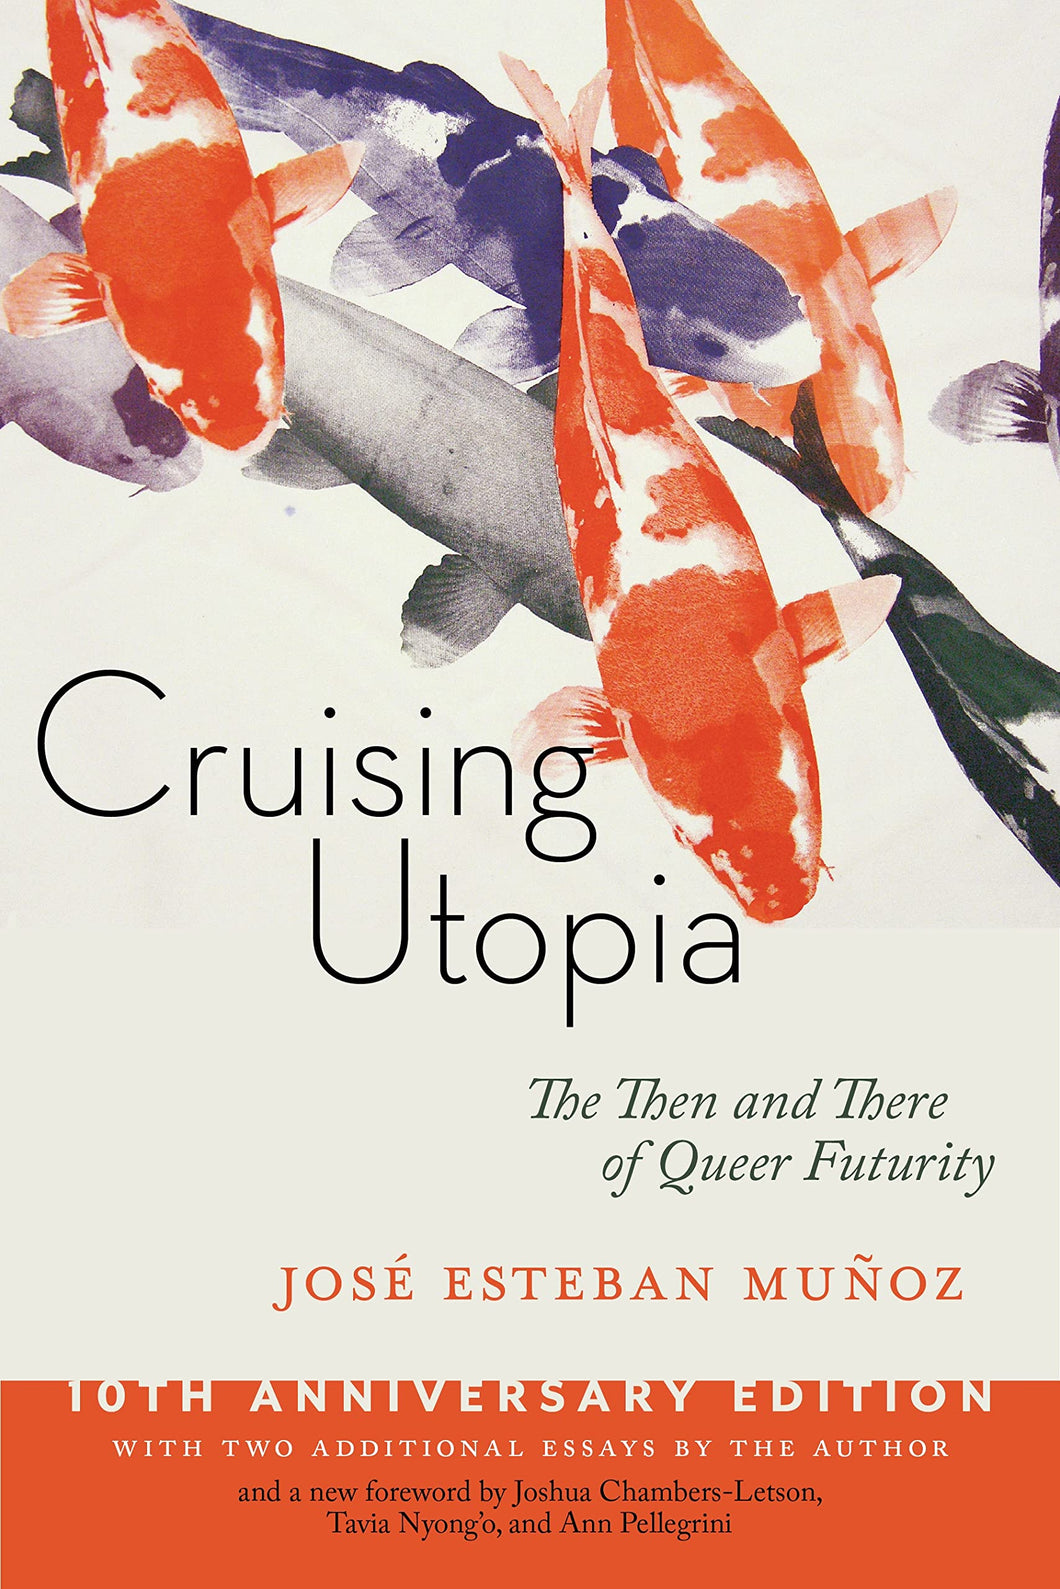 Cruising Utopia, 10th Anniversary Edition: The Then and There of Queer Futurity by José Esteban Muñoz